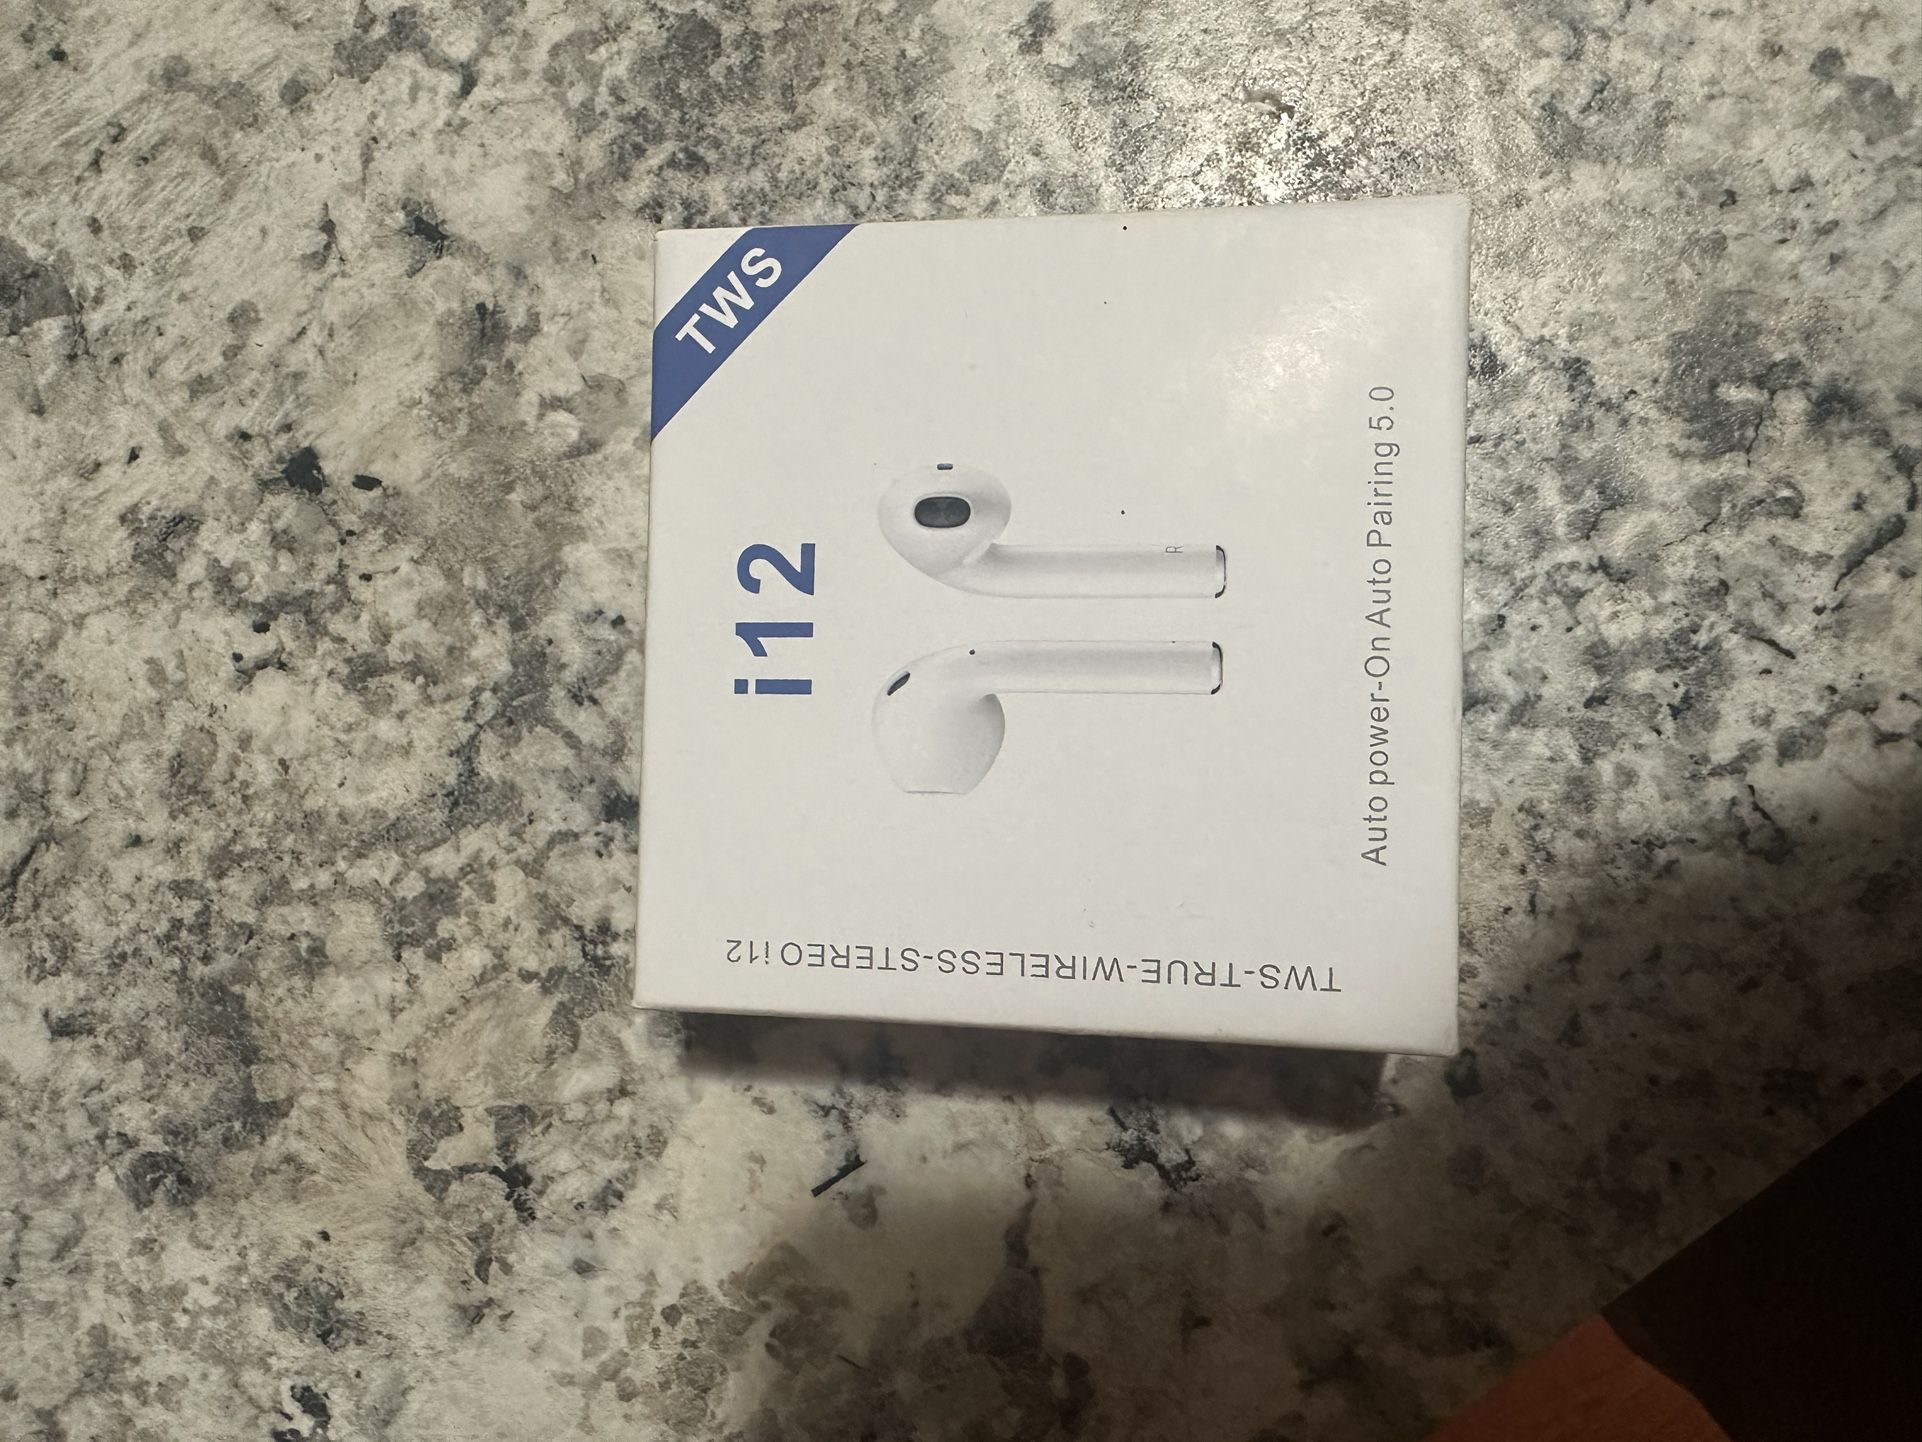 i12 airpods 